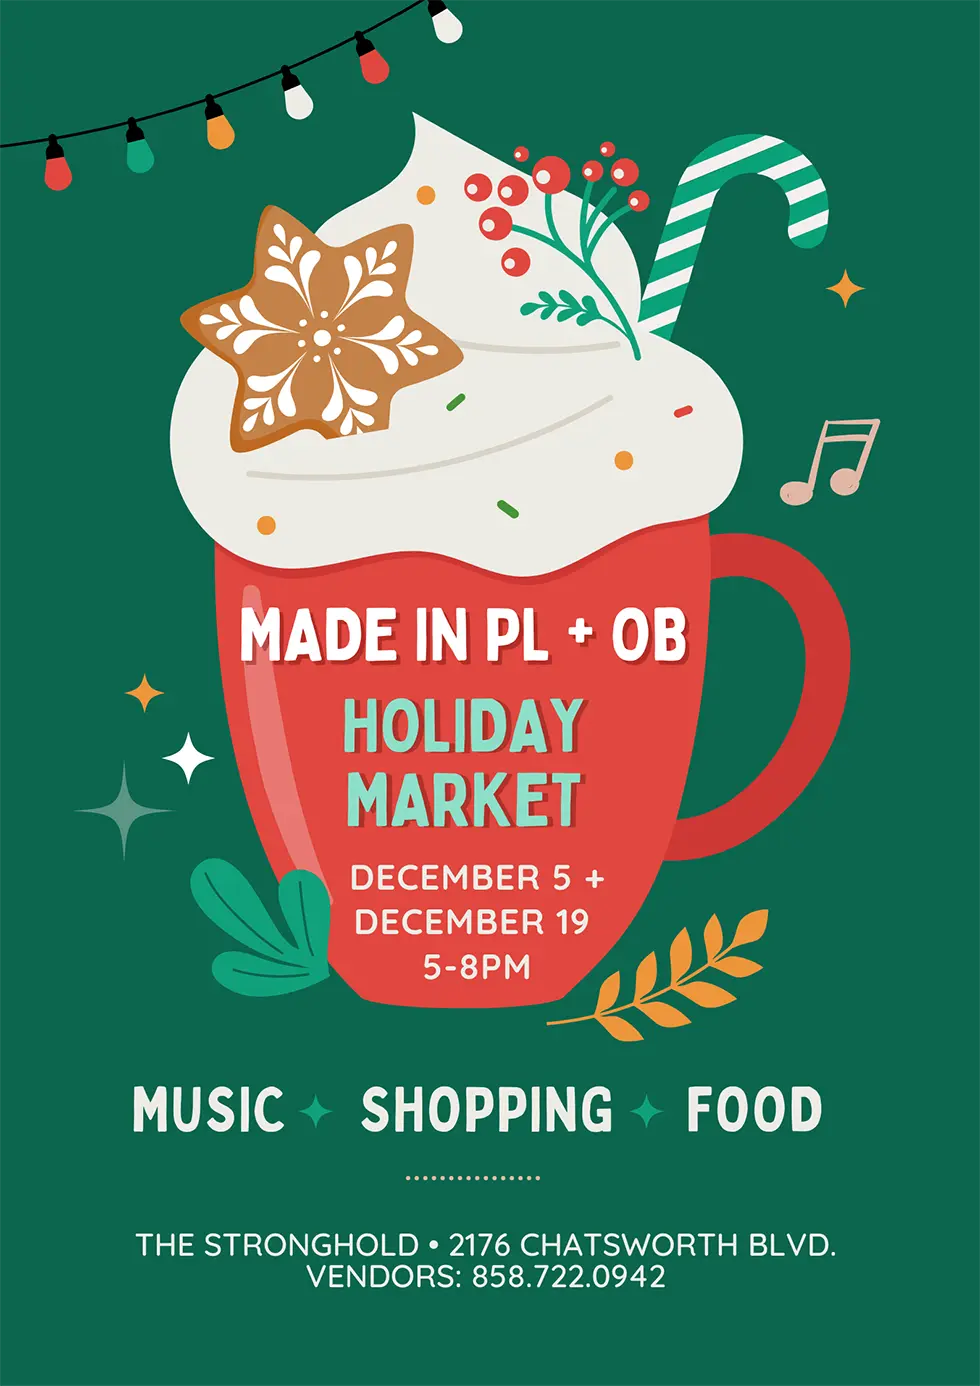 Made in PL + OB Holiday Market